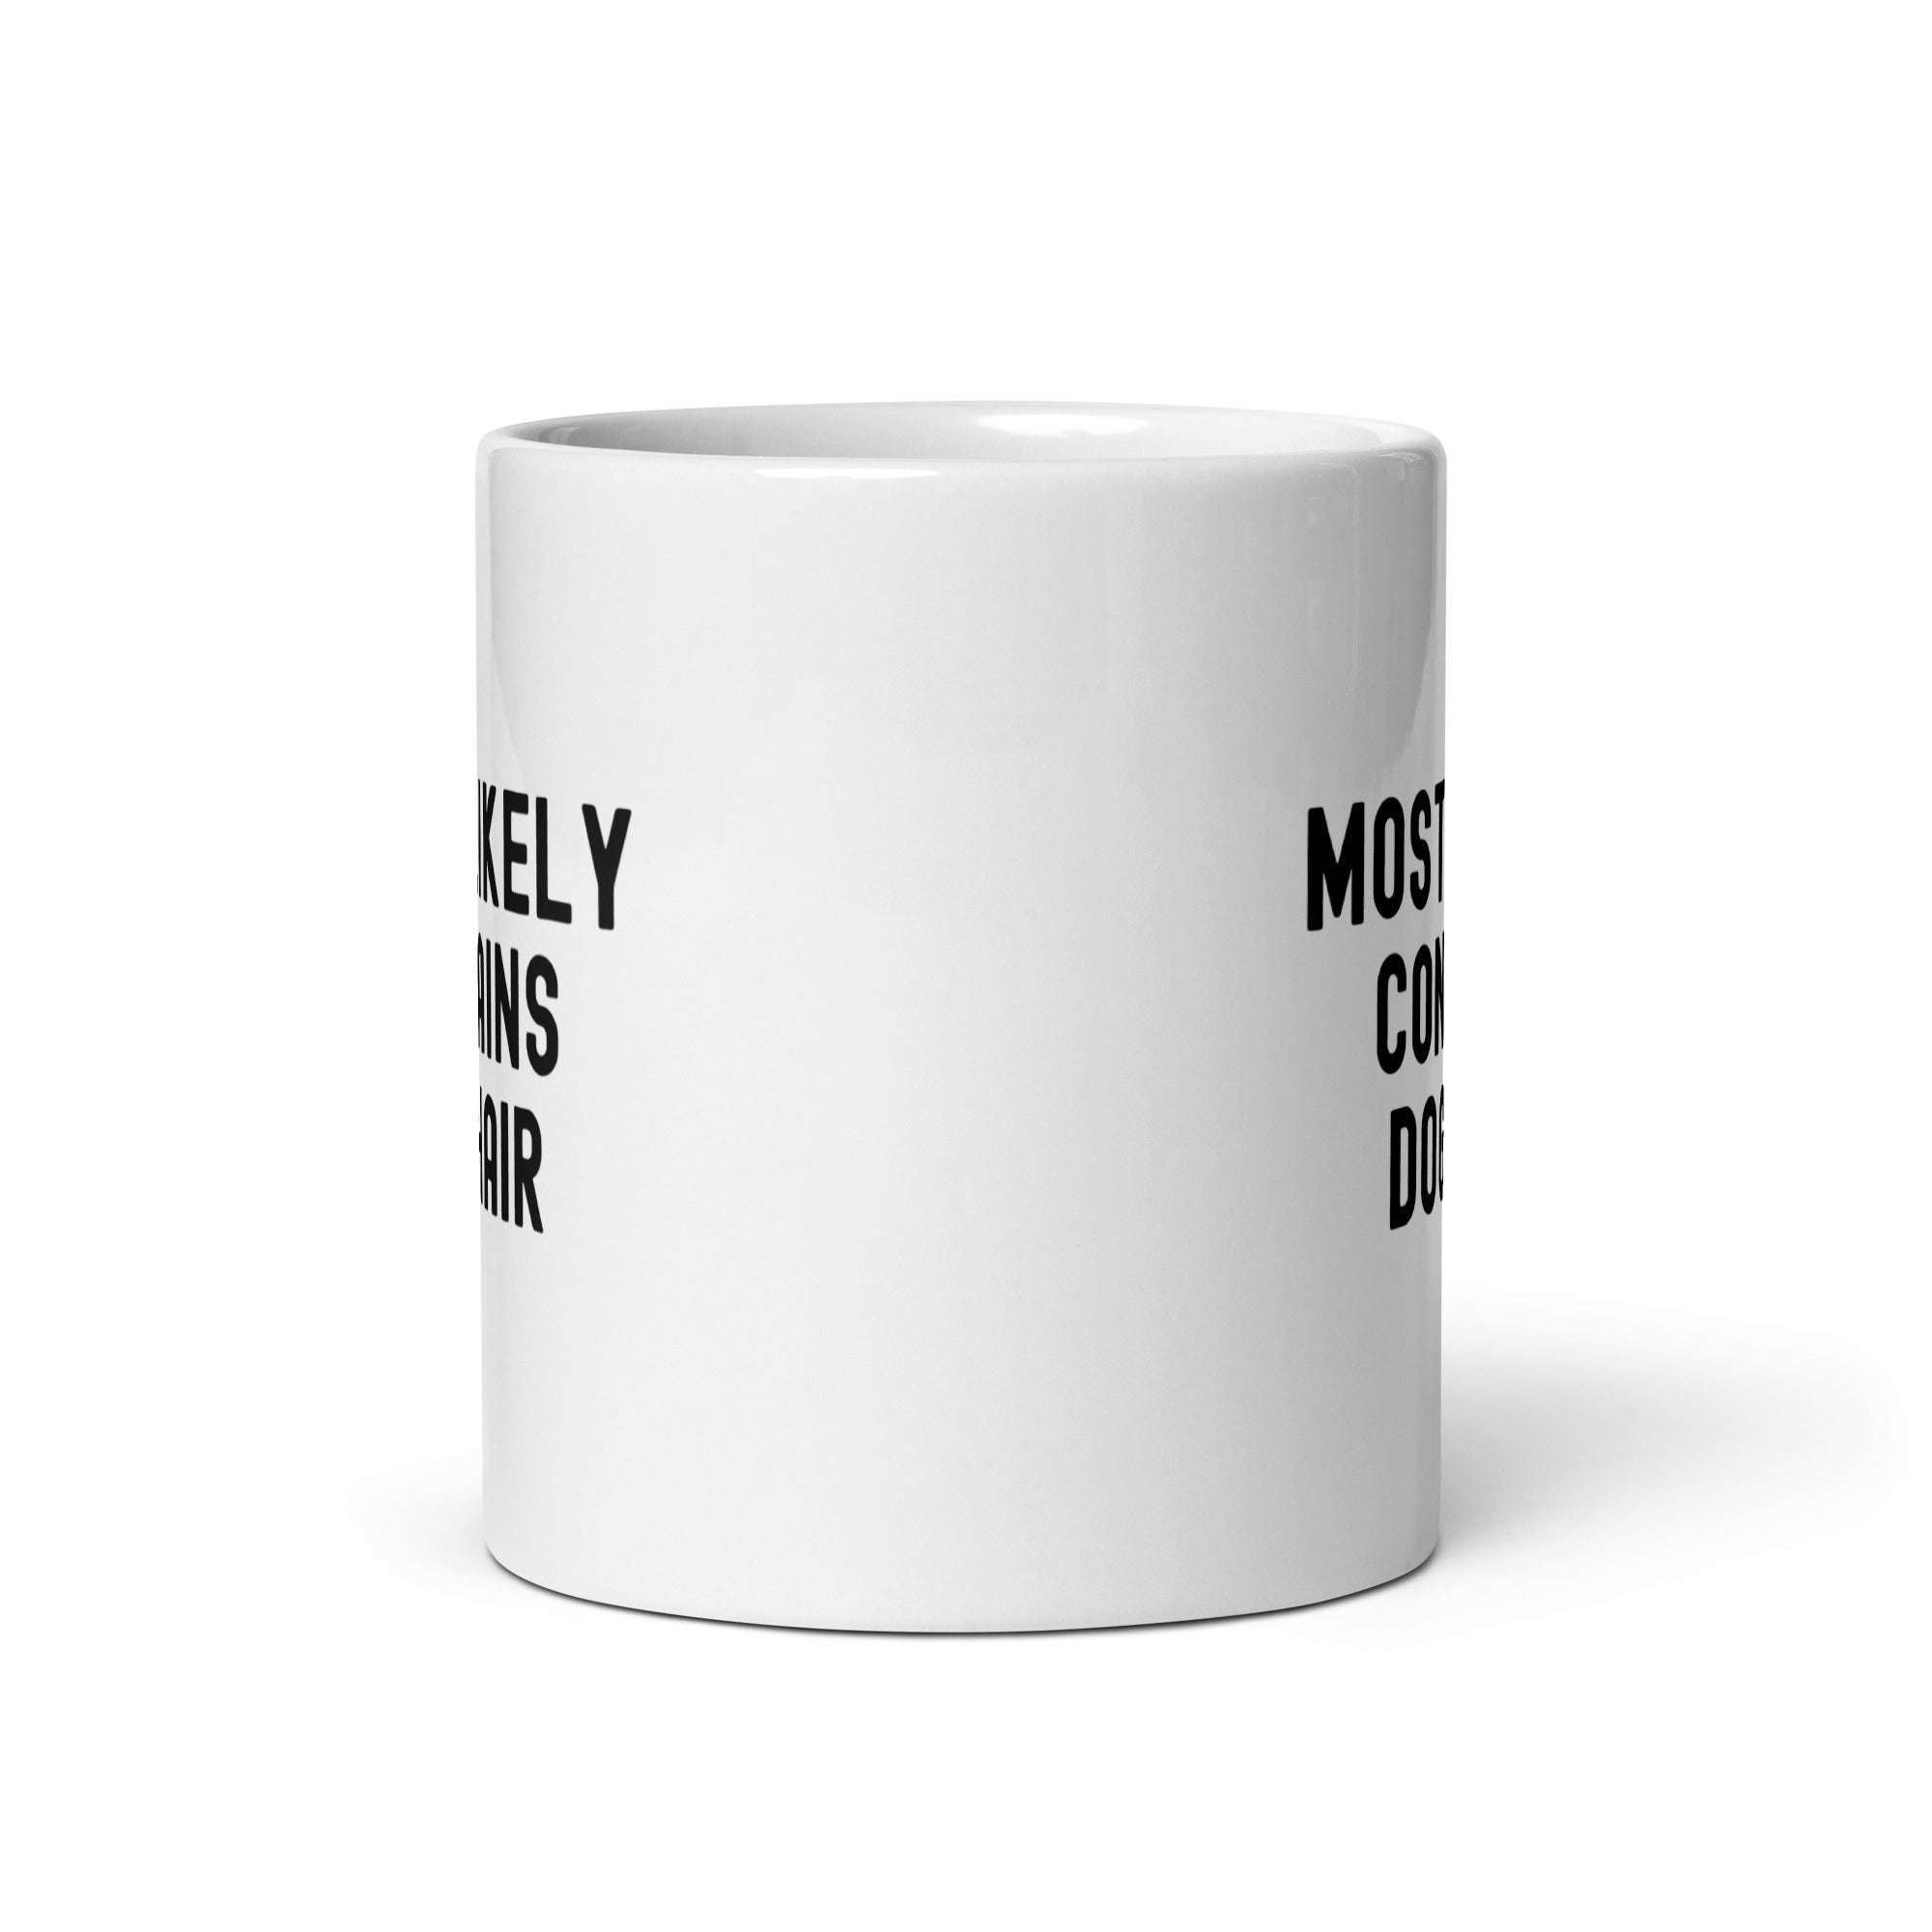 White glossy mug | Most Likely Contains Dog Hair